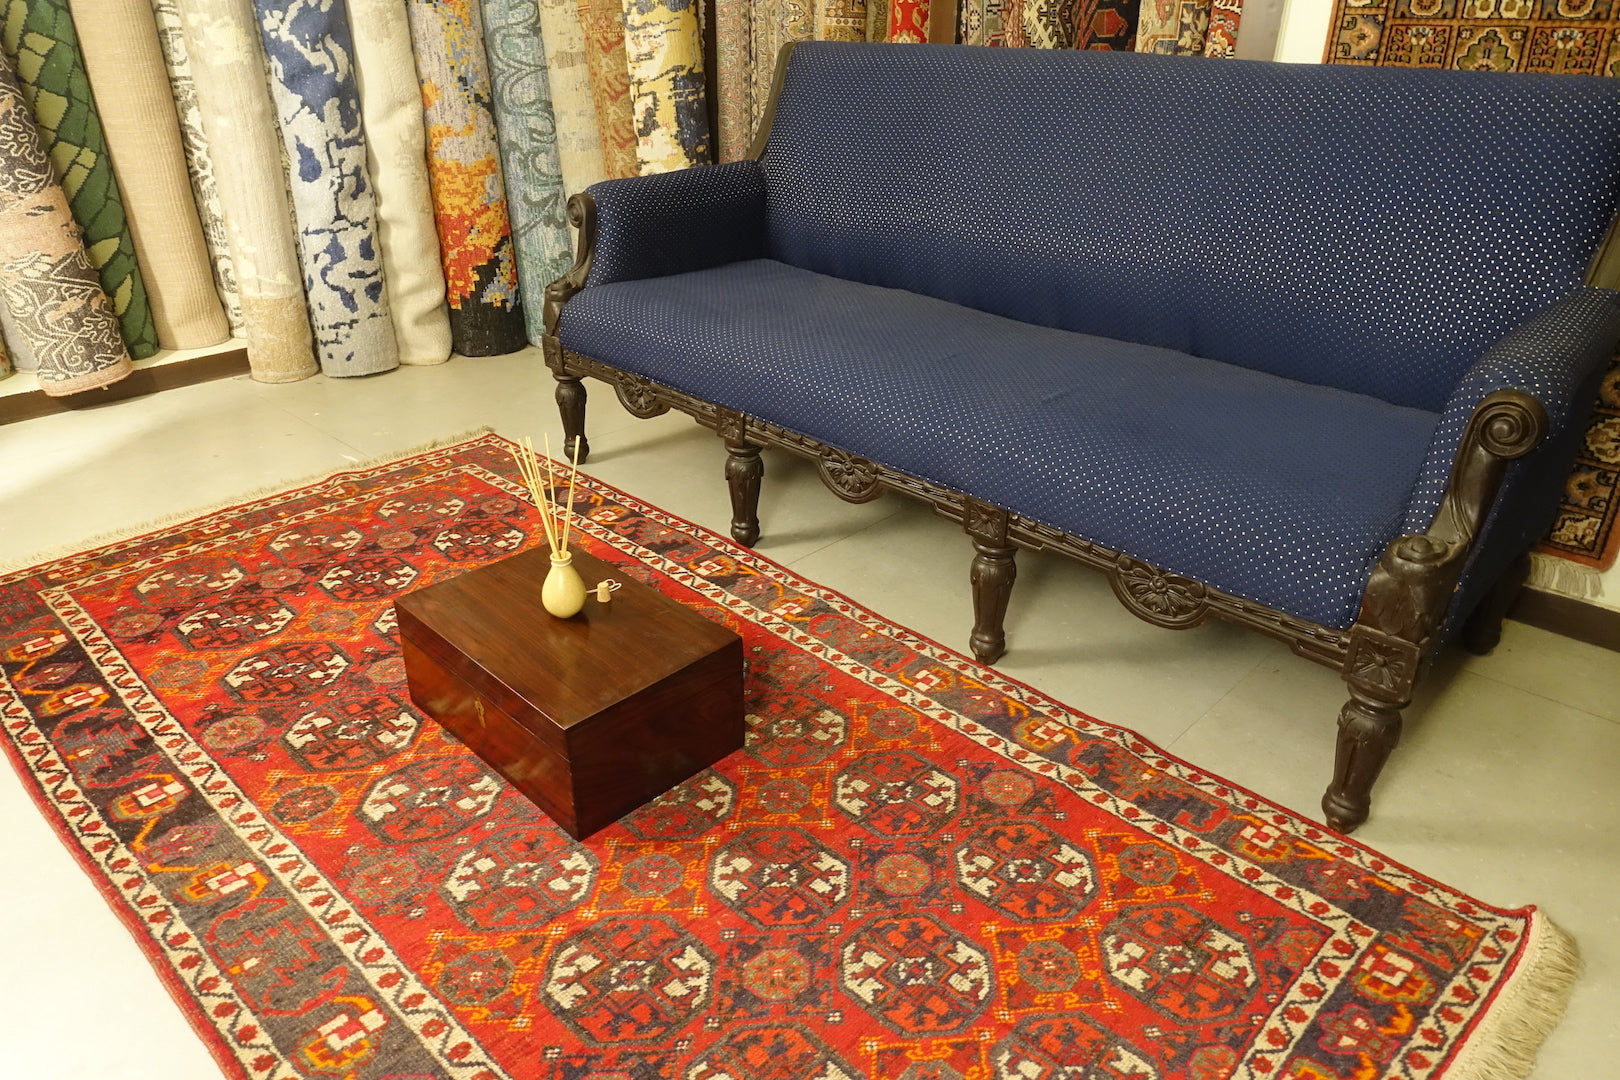 A 3.75 feet by 7.5 feet antique turkoman rug, the colours used on the rug are deep red,blue,yellow,pink and rust.